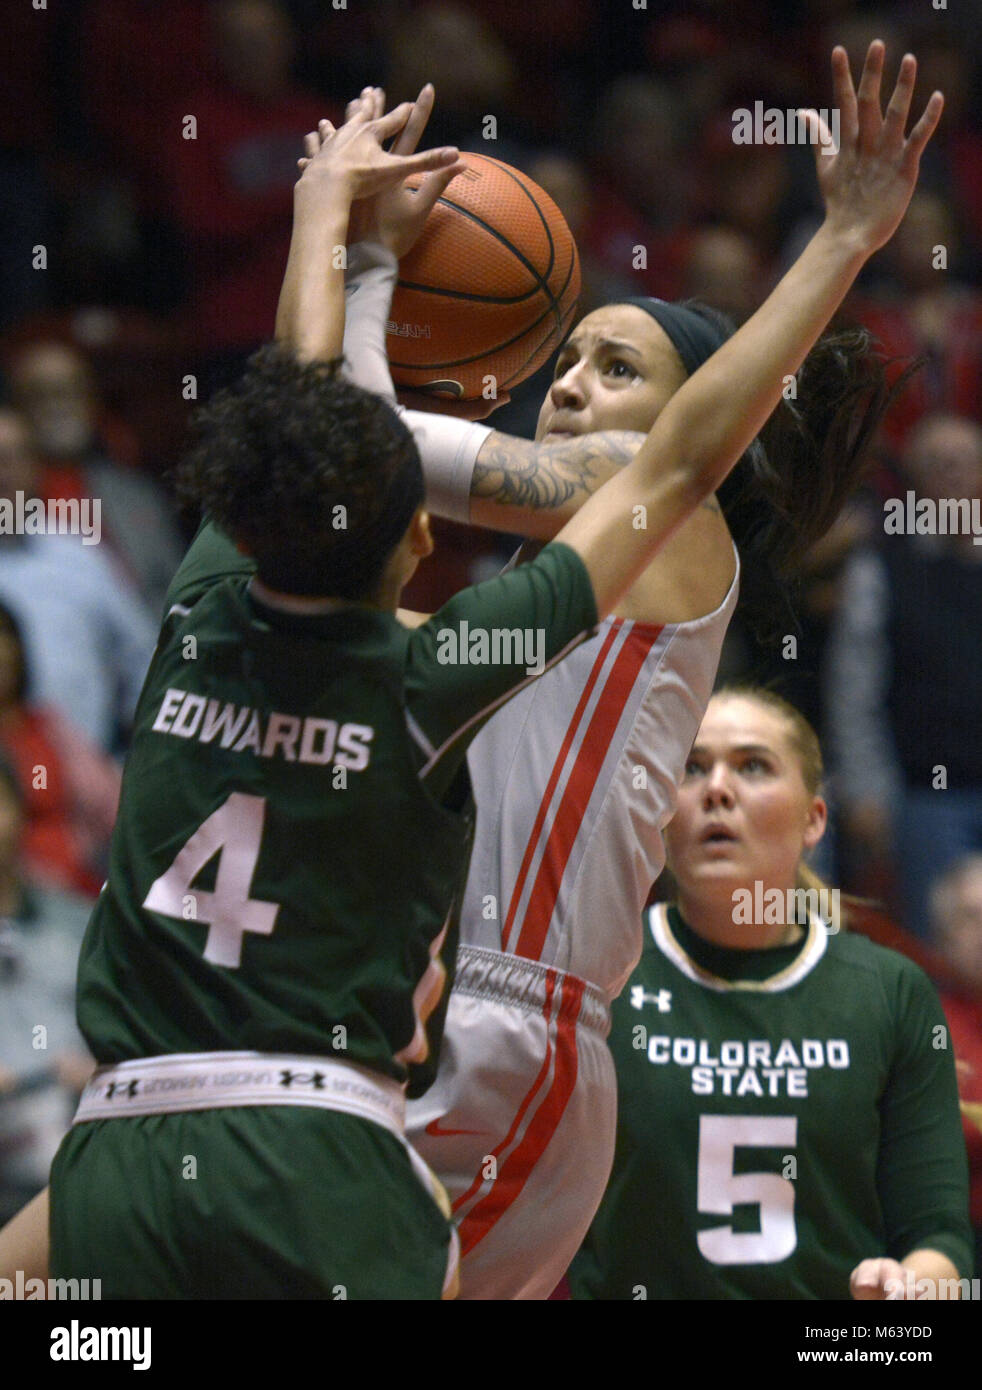 U.S. 27th Feb, 2018. SPORTS -- UNM's Cherise Beynon drives for a shot past Colorado States Jordyn Edwards, 4, during the game in The Pit on Tuesday, February 27, 2018. Credit: Greg Sorber/Albuquerque Journal/ZUMA Wire/Alamy Live News Stock Photo